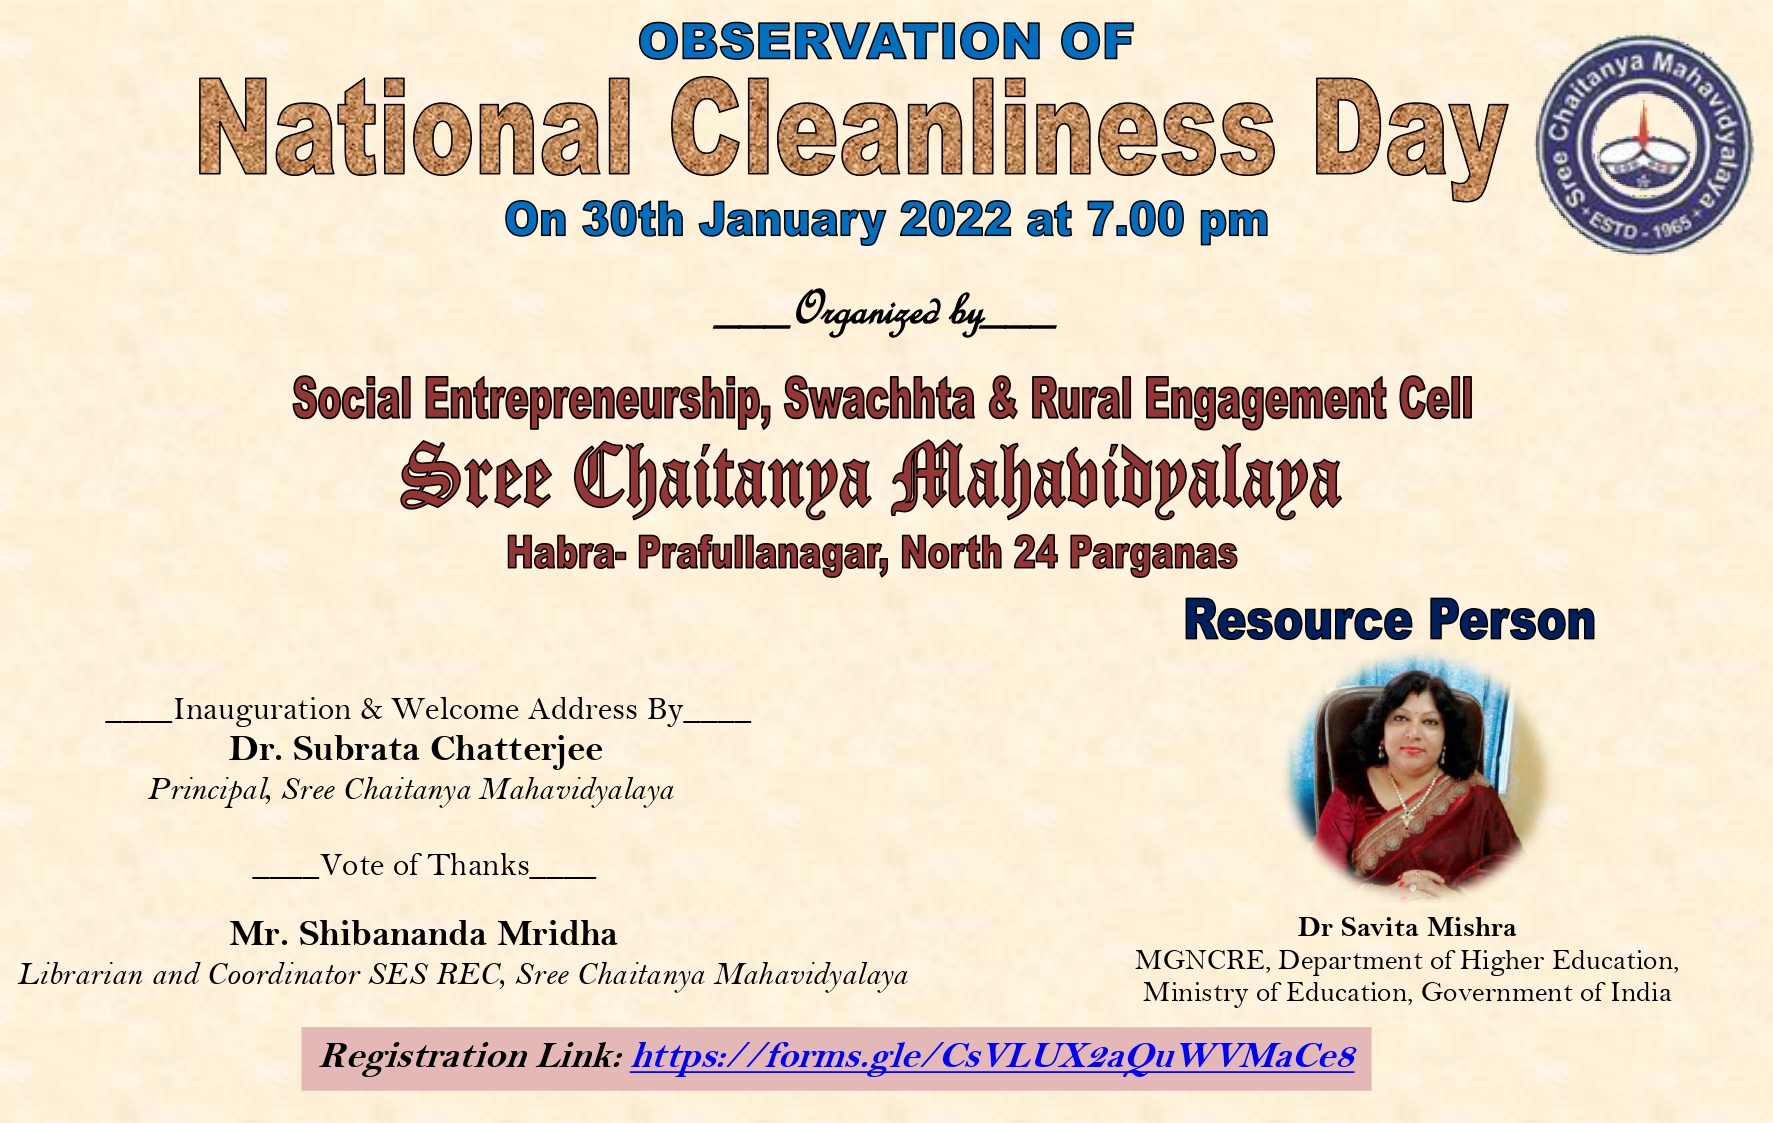 Webinar on National Cleanliness Day, 30-01-22